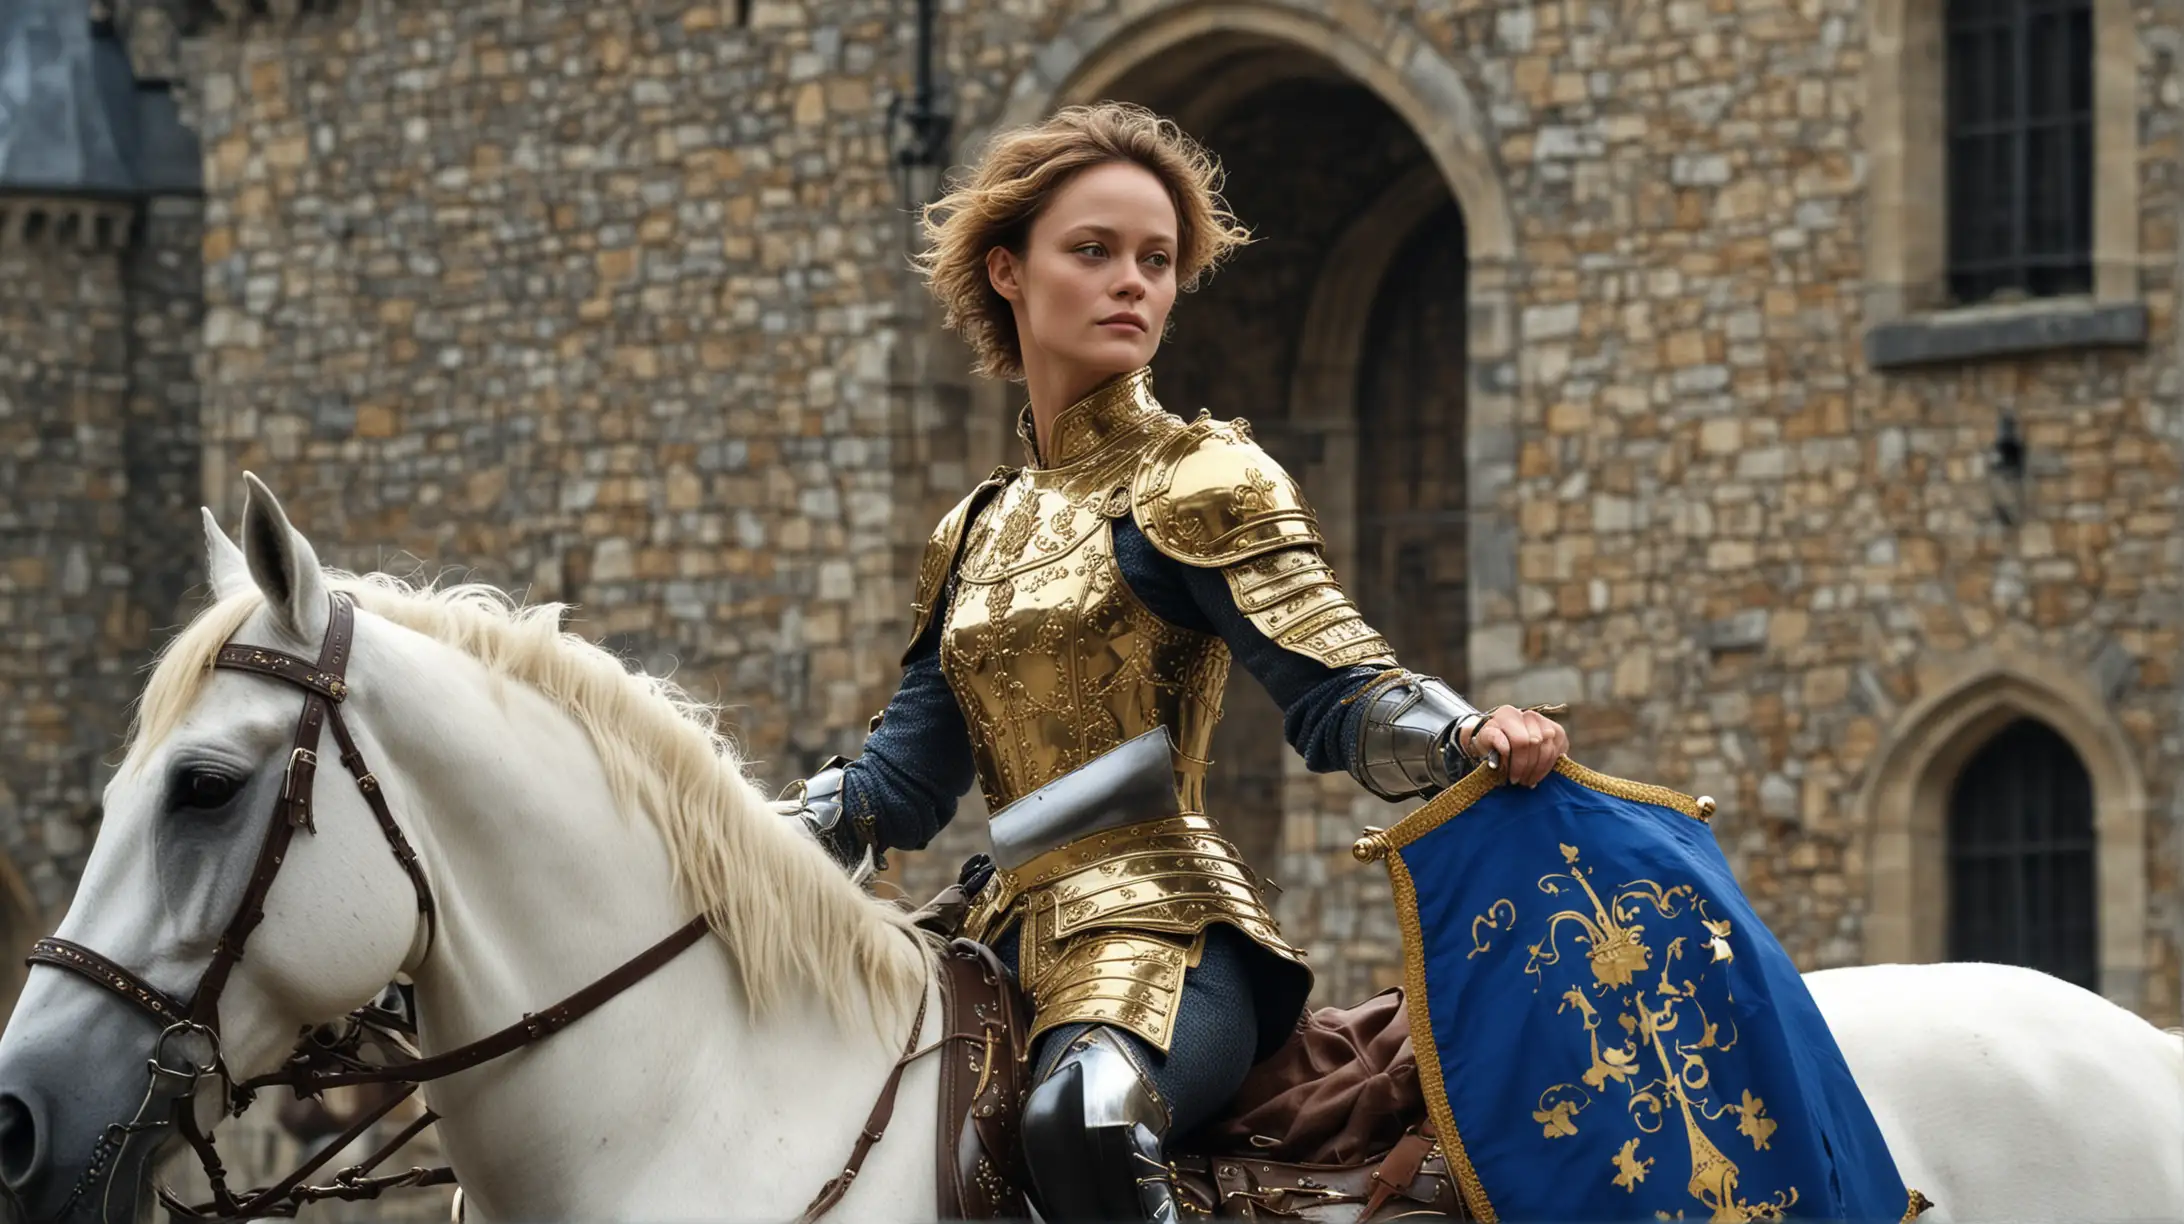 Vanessa Paradis, in fifteenth century signet ring armor, without helmet, very short hair, the breastplate is cut to accommodate the chest, she rides a white horse caparisoned, she holds the blue flag with gold borders and stylized white fleurs-de-lys of the King of France, behind her, we see very far a castle and a troop of knights,  photography, realistic